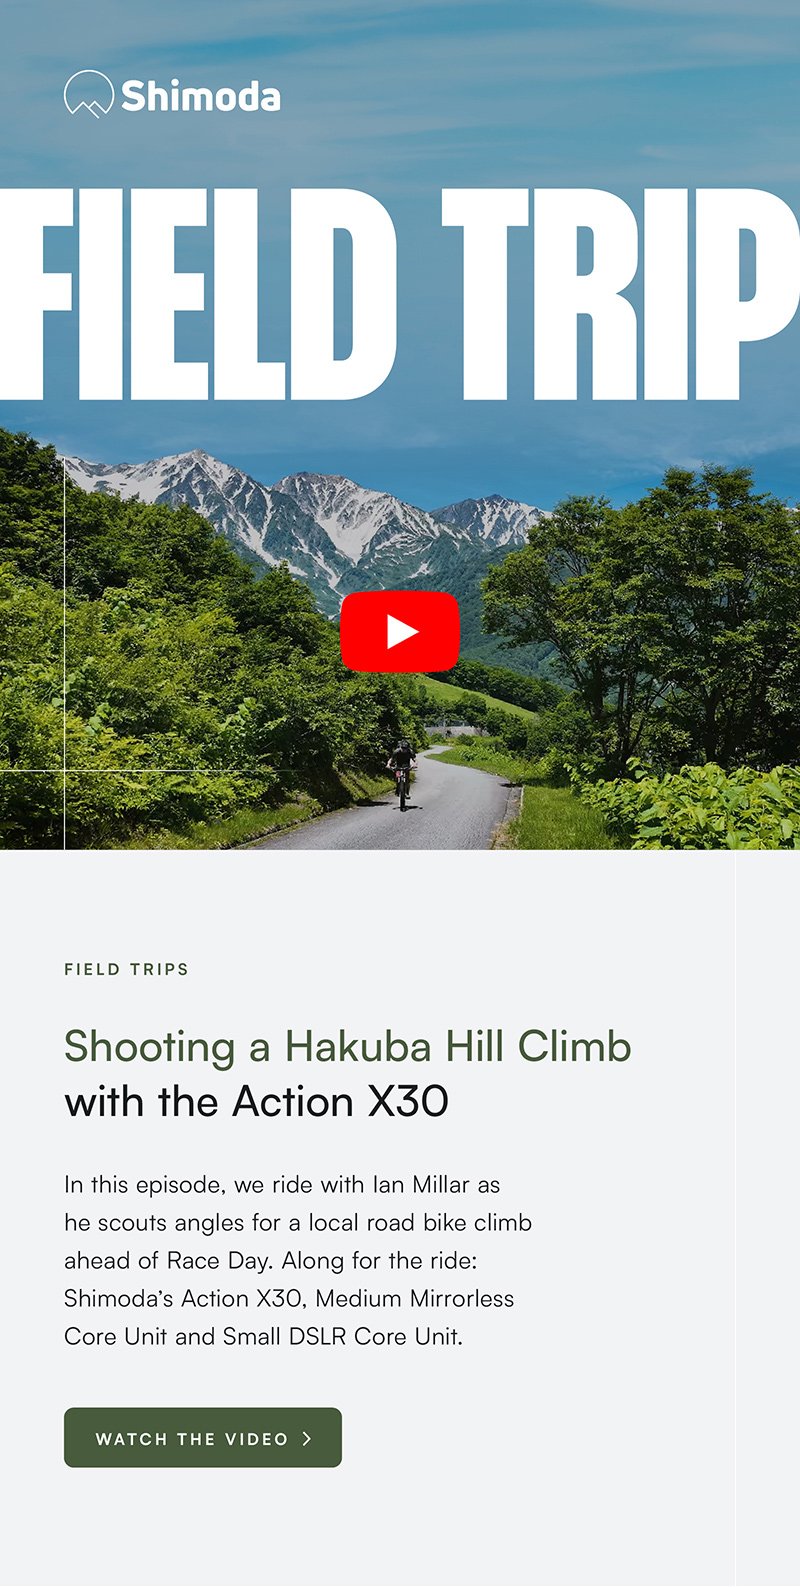 Shooting a Hakuba Hill Climb with the Action X30. Watch the Video.